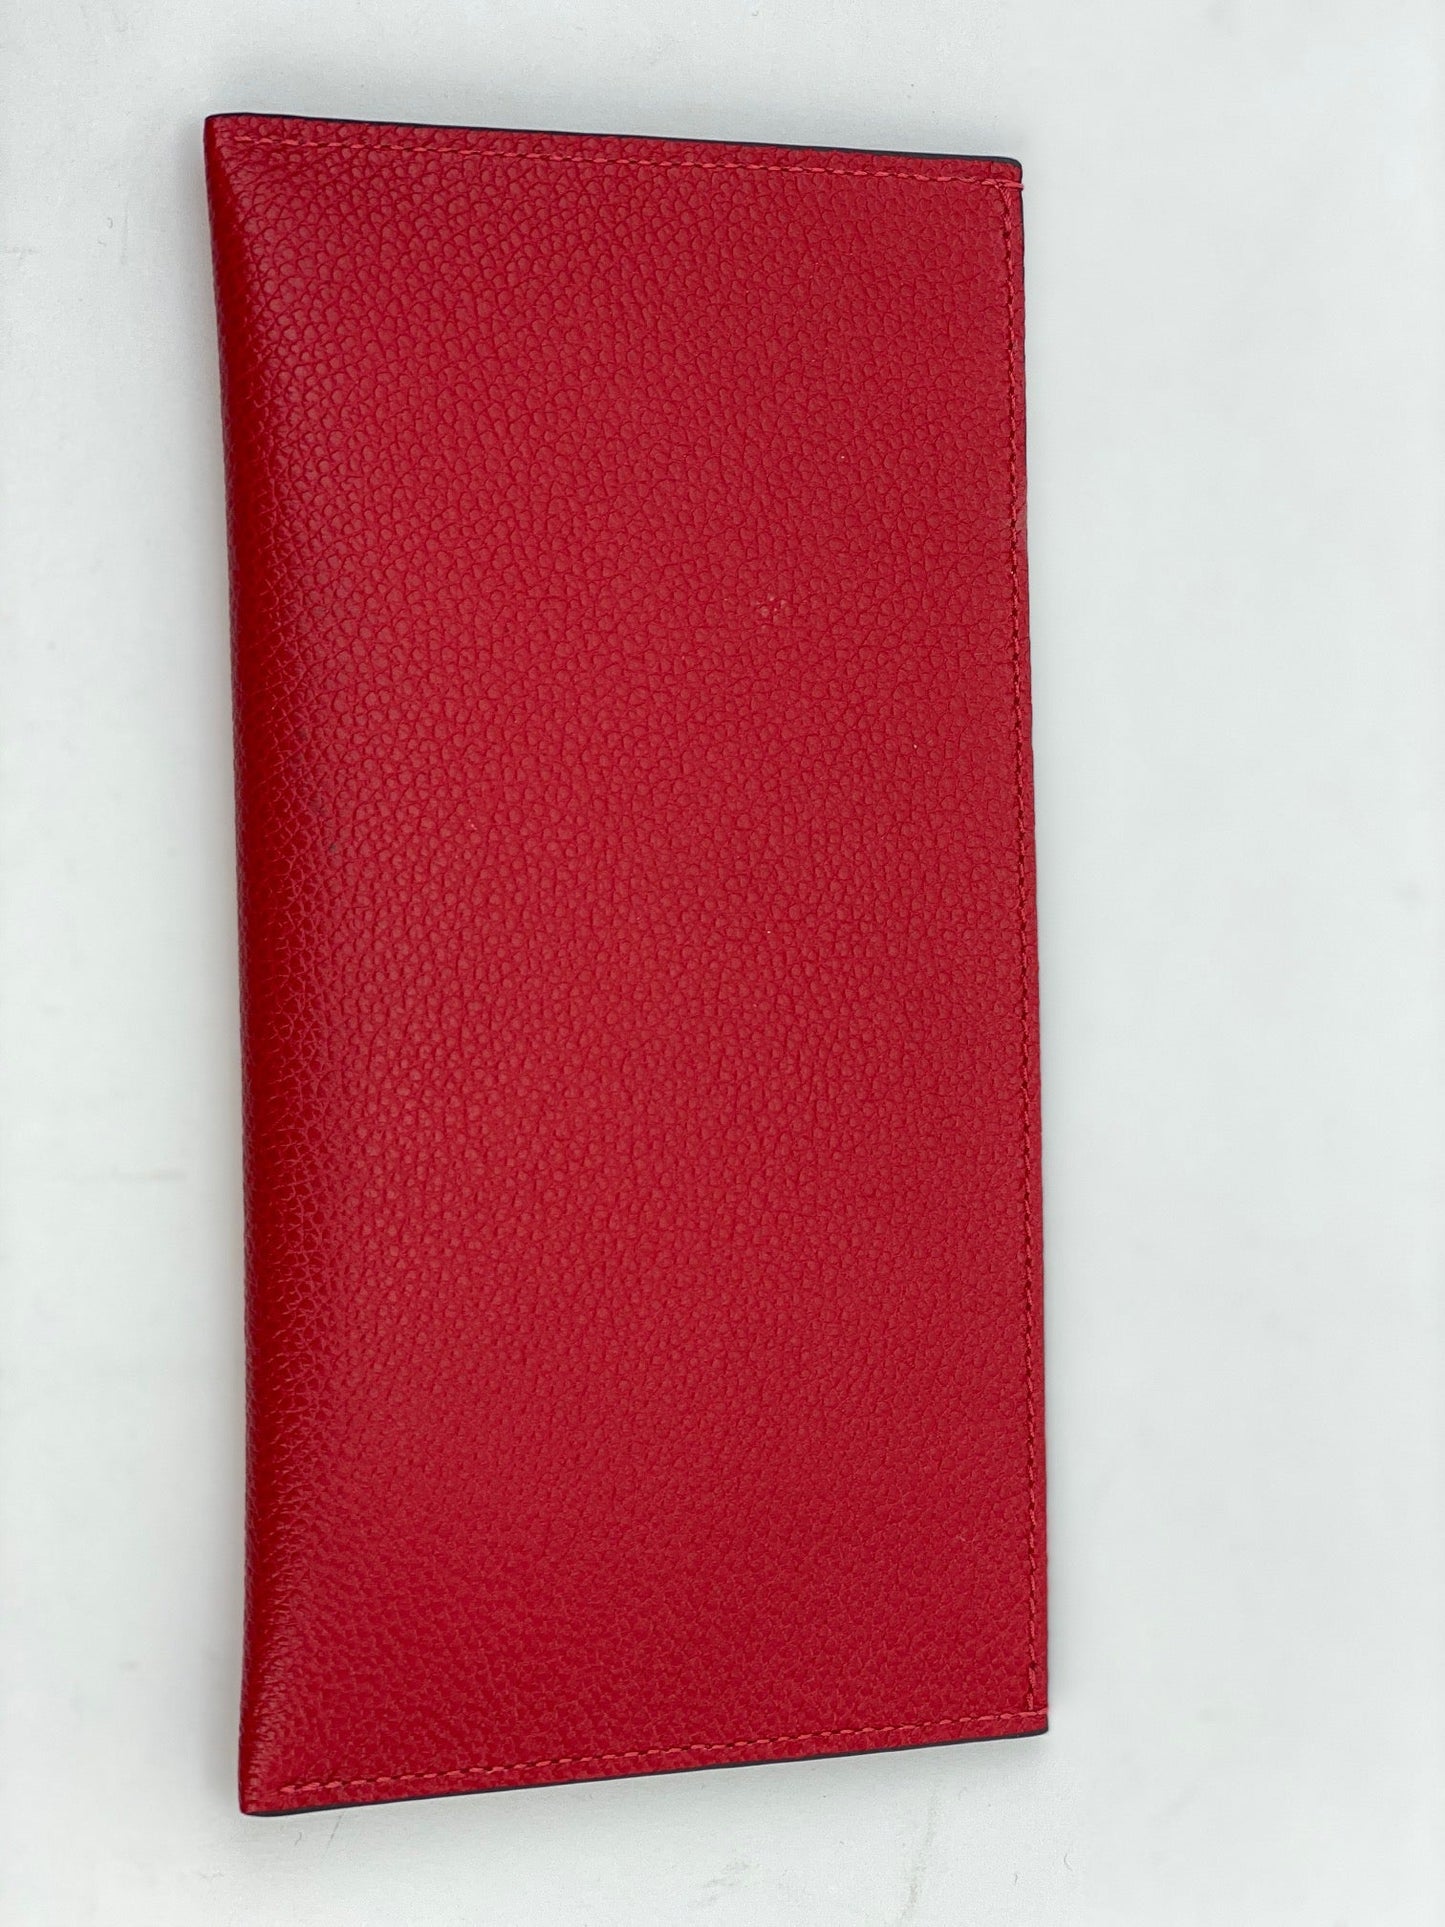 Louis Vuitton, Bags, Louis Vuitton Felicie Pouchette In Scarlet With Both  Inserts And Receipt